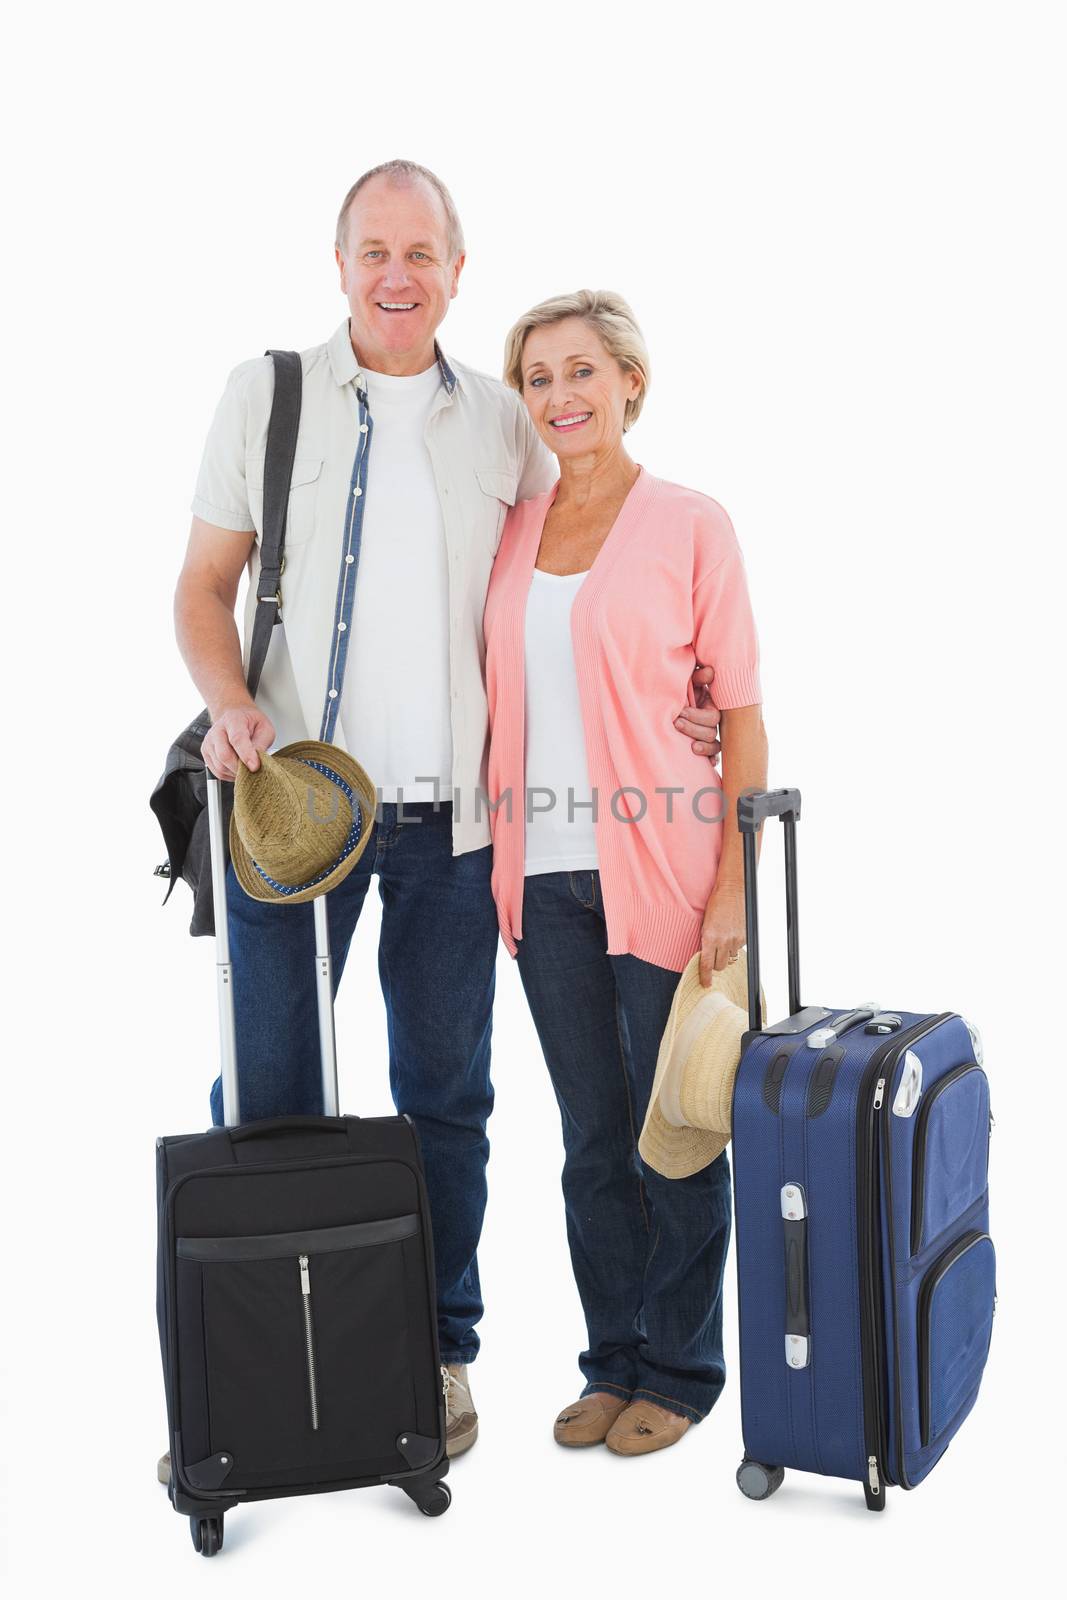 Smiling older couple going on their holidays on white background